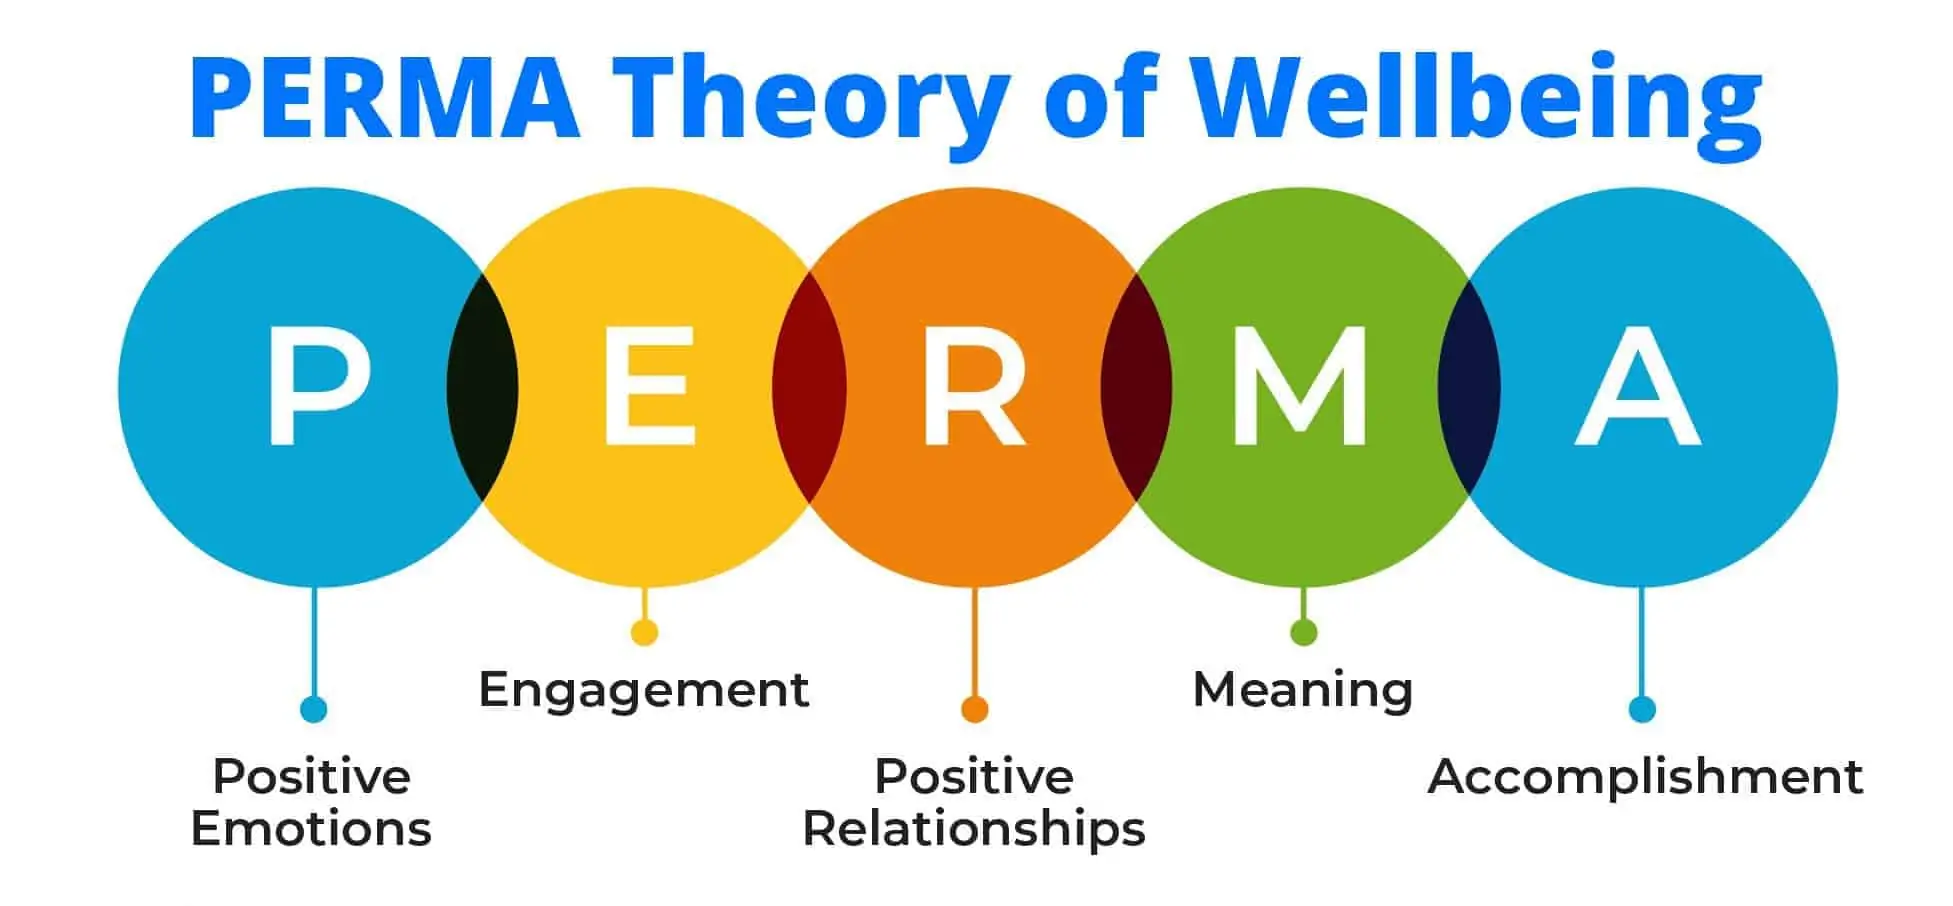 PERMA Theory of Wellbeing